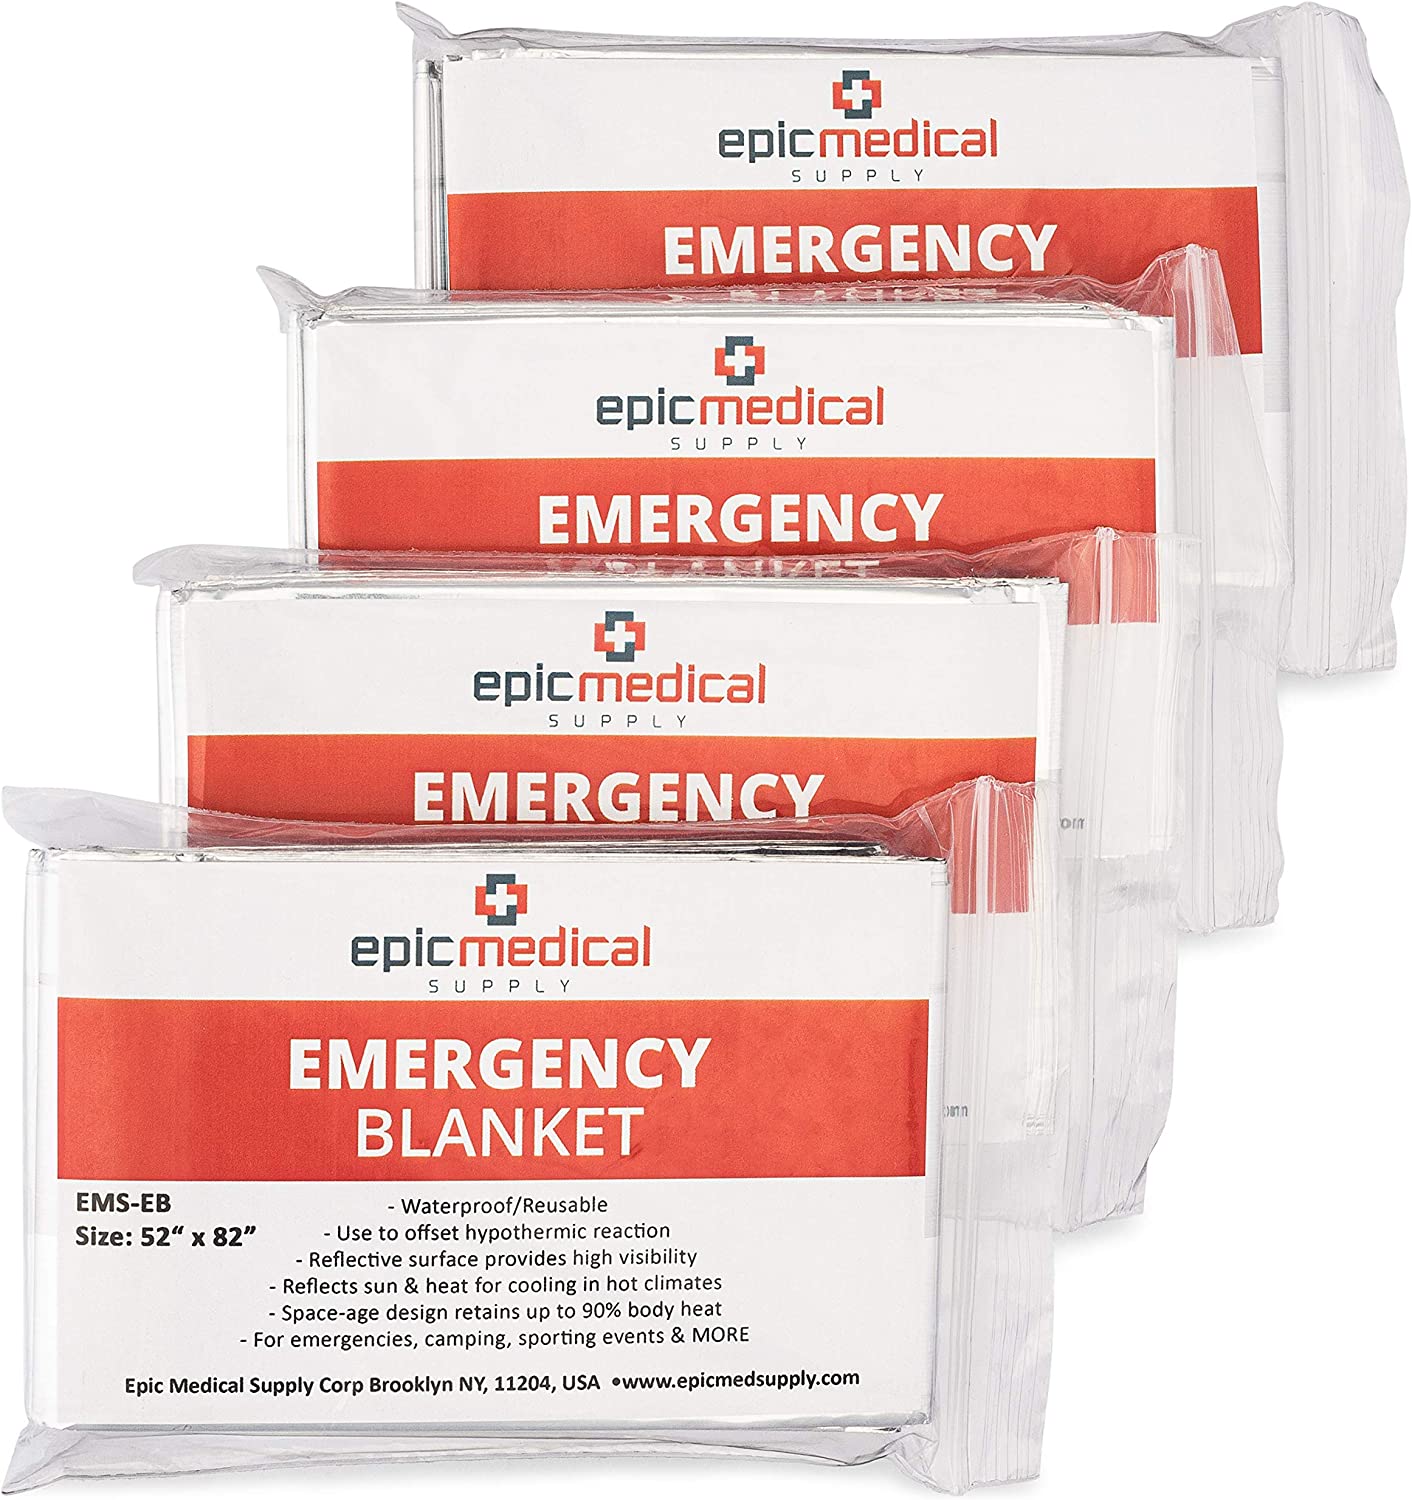 Epic Medical Supply Emergency Mylar Thermal Blankets 4-Pack Great for Survival, Outdoors, Hiking, Marathons, First Aid Kits